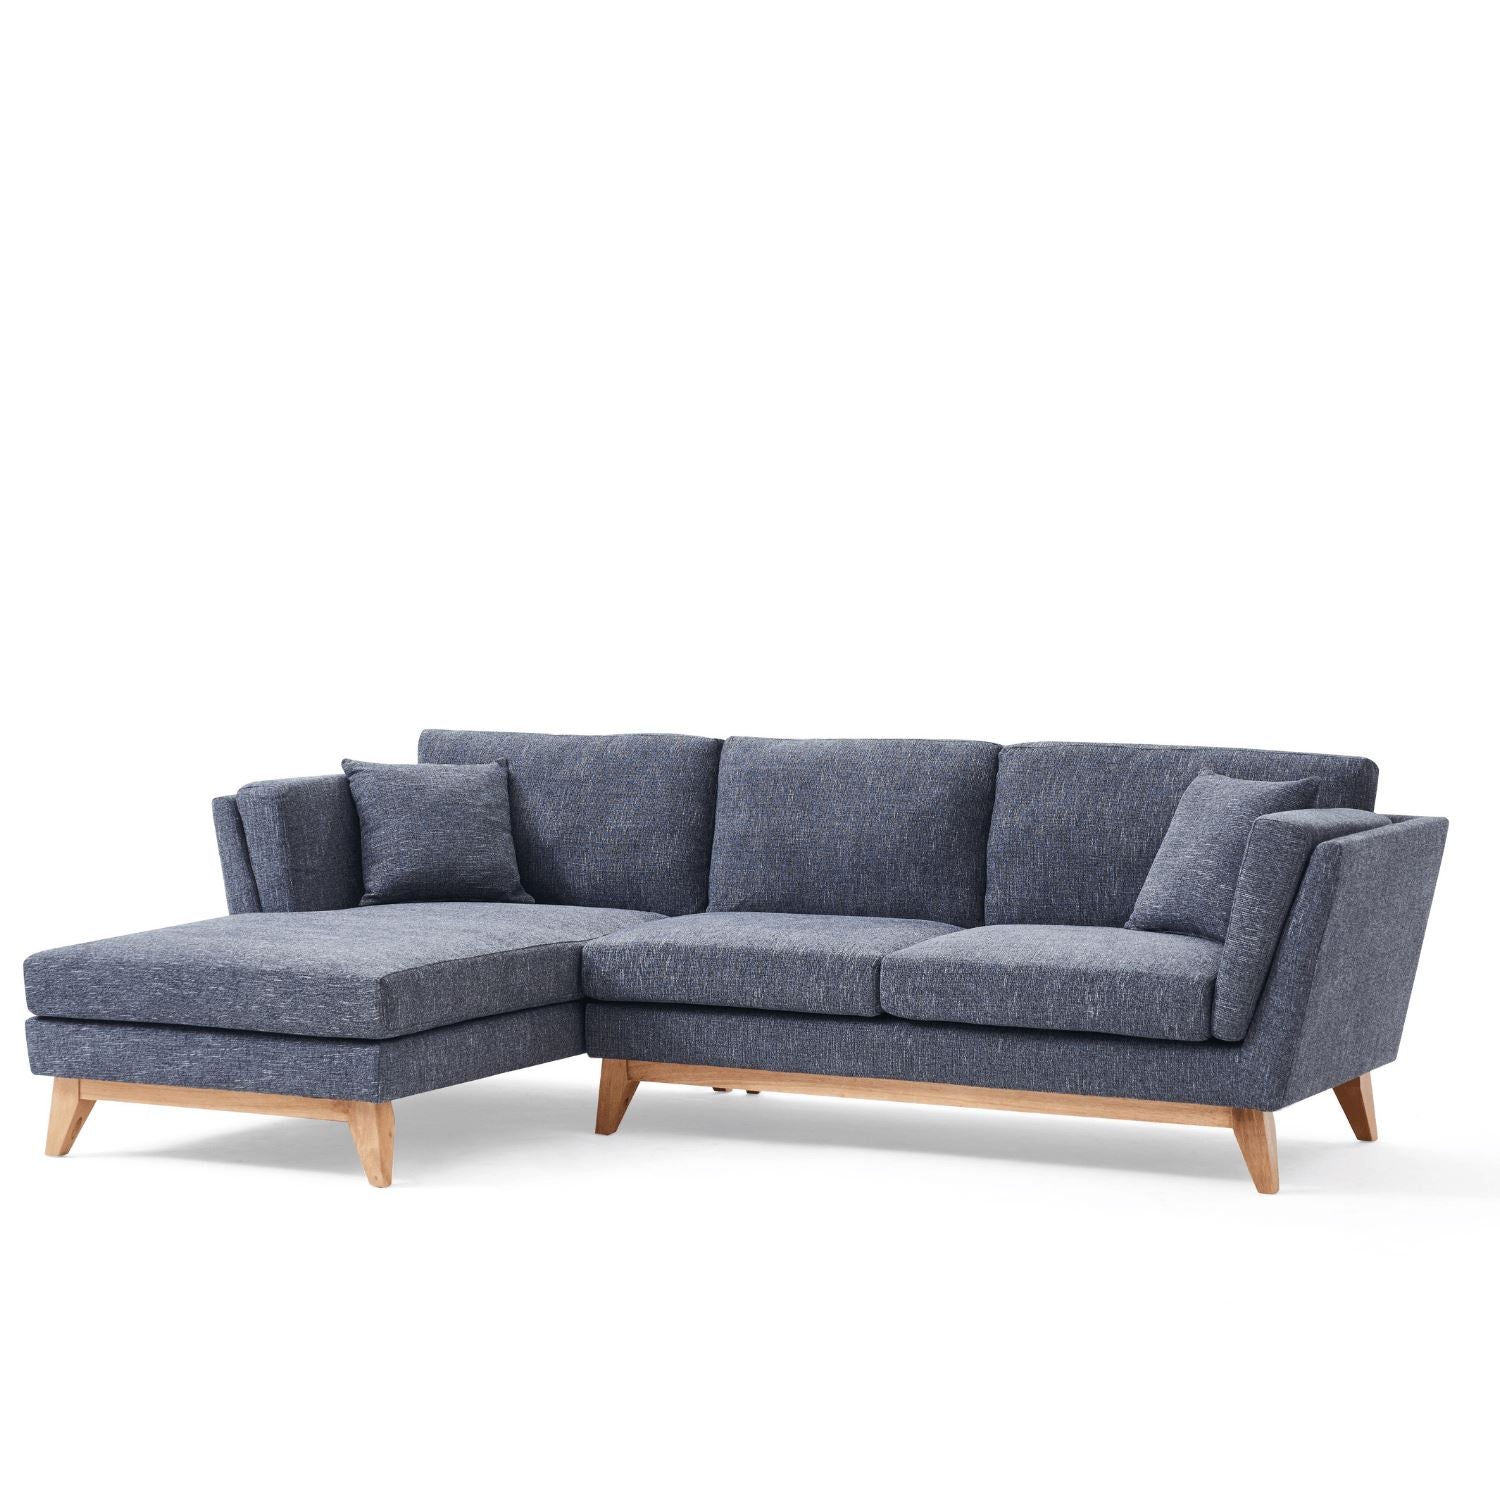 Sectional ValMinimal Valyou Furniture |